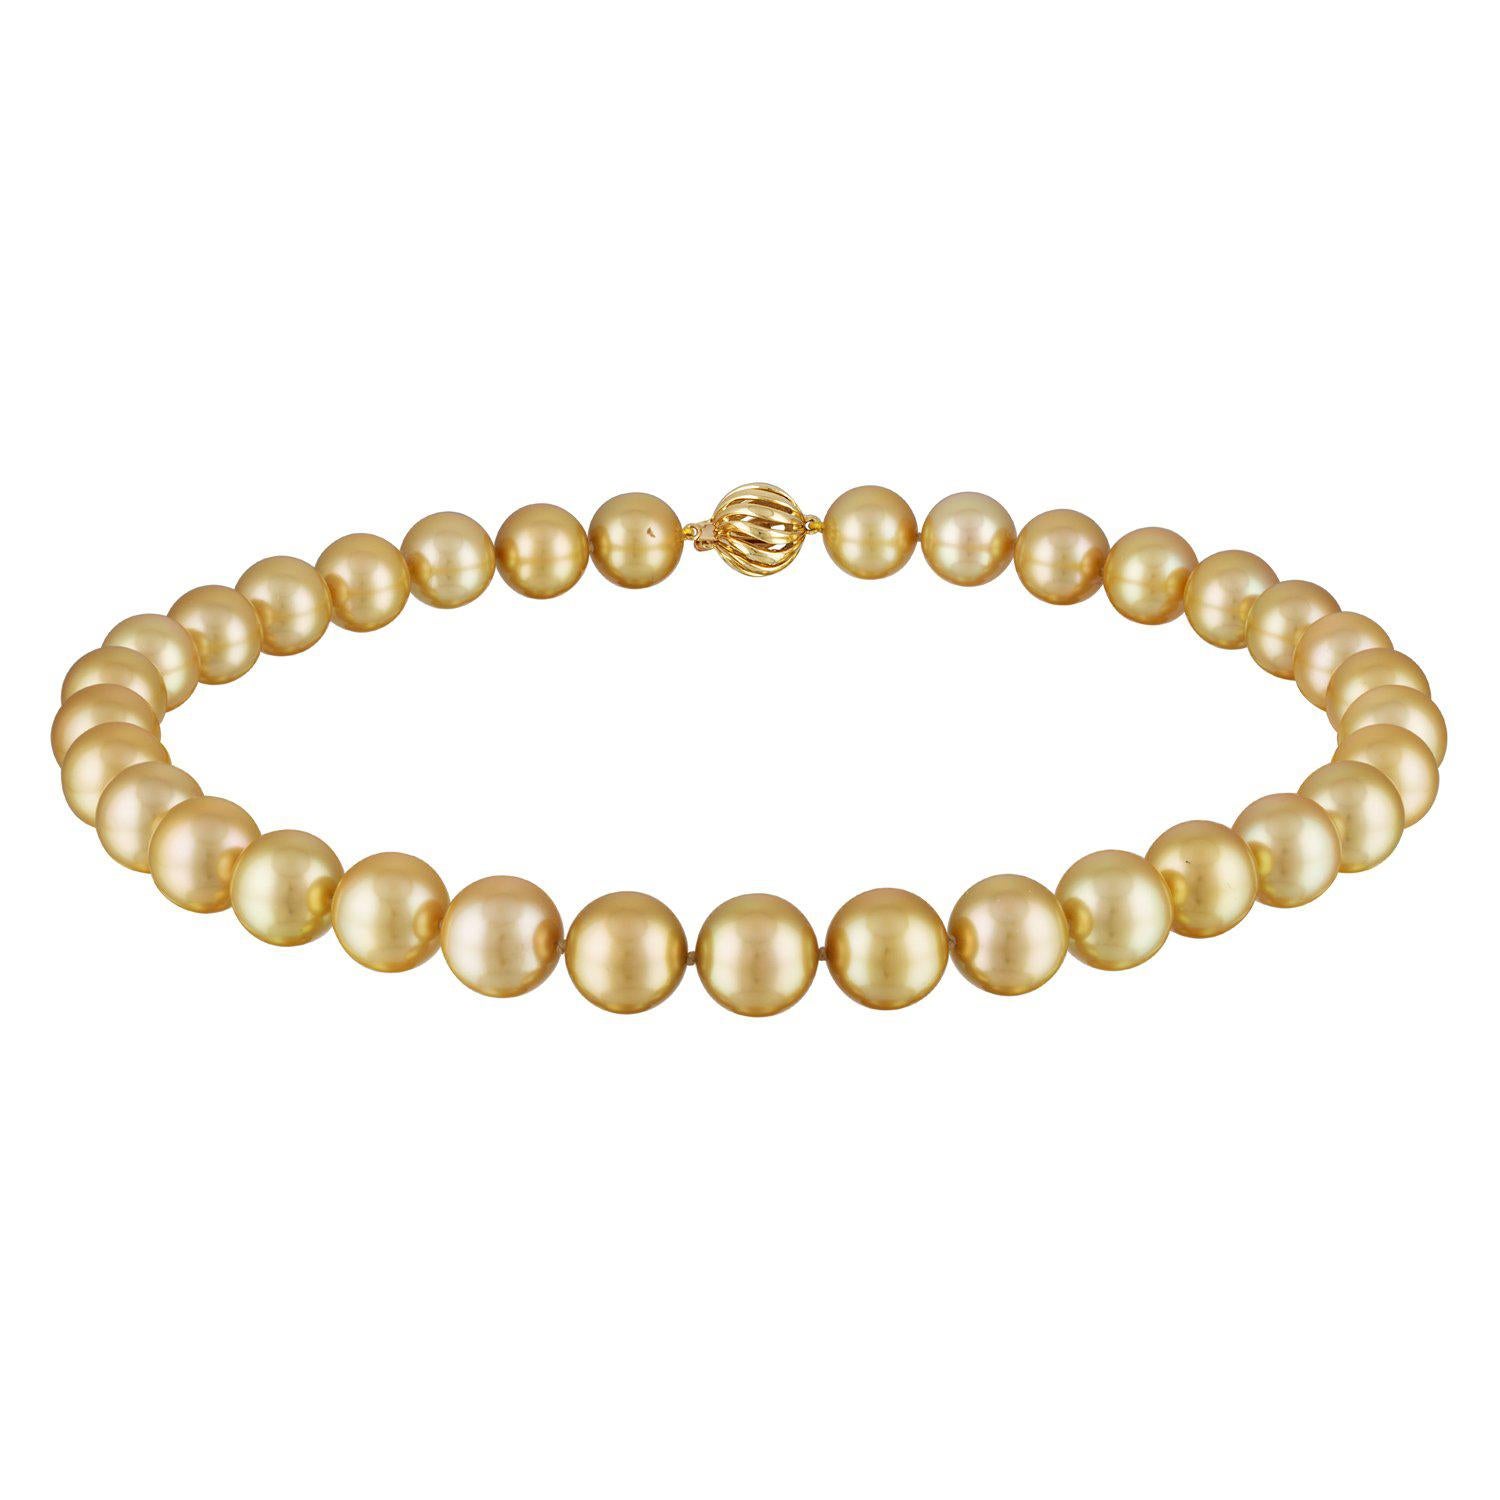 NATURAL 10-11MM SOUTH SEA WHITE PEARL BRACELET 14K GOLD CLASP